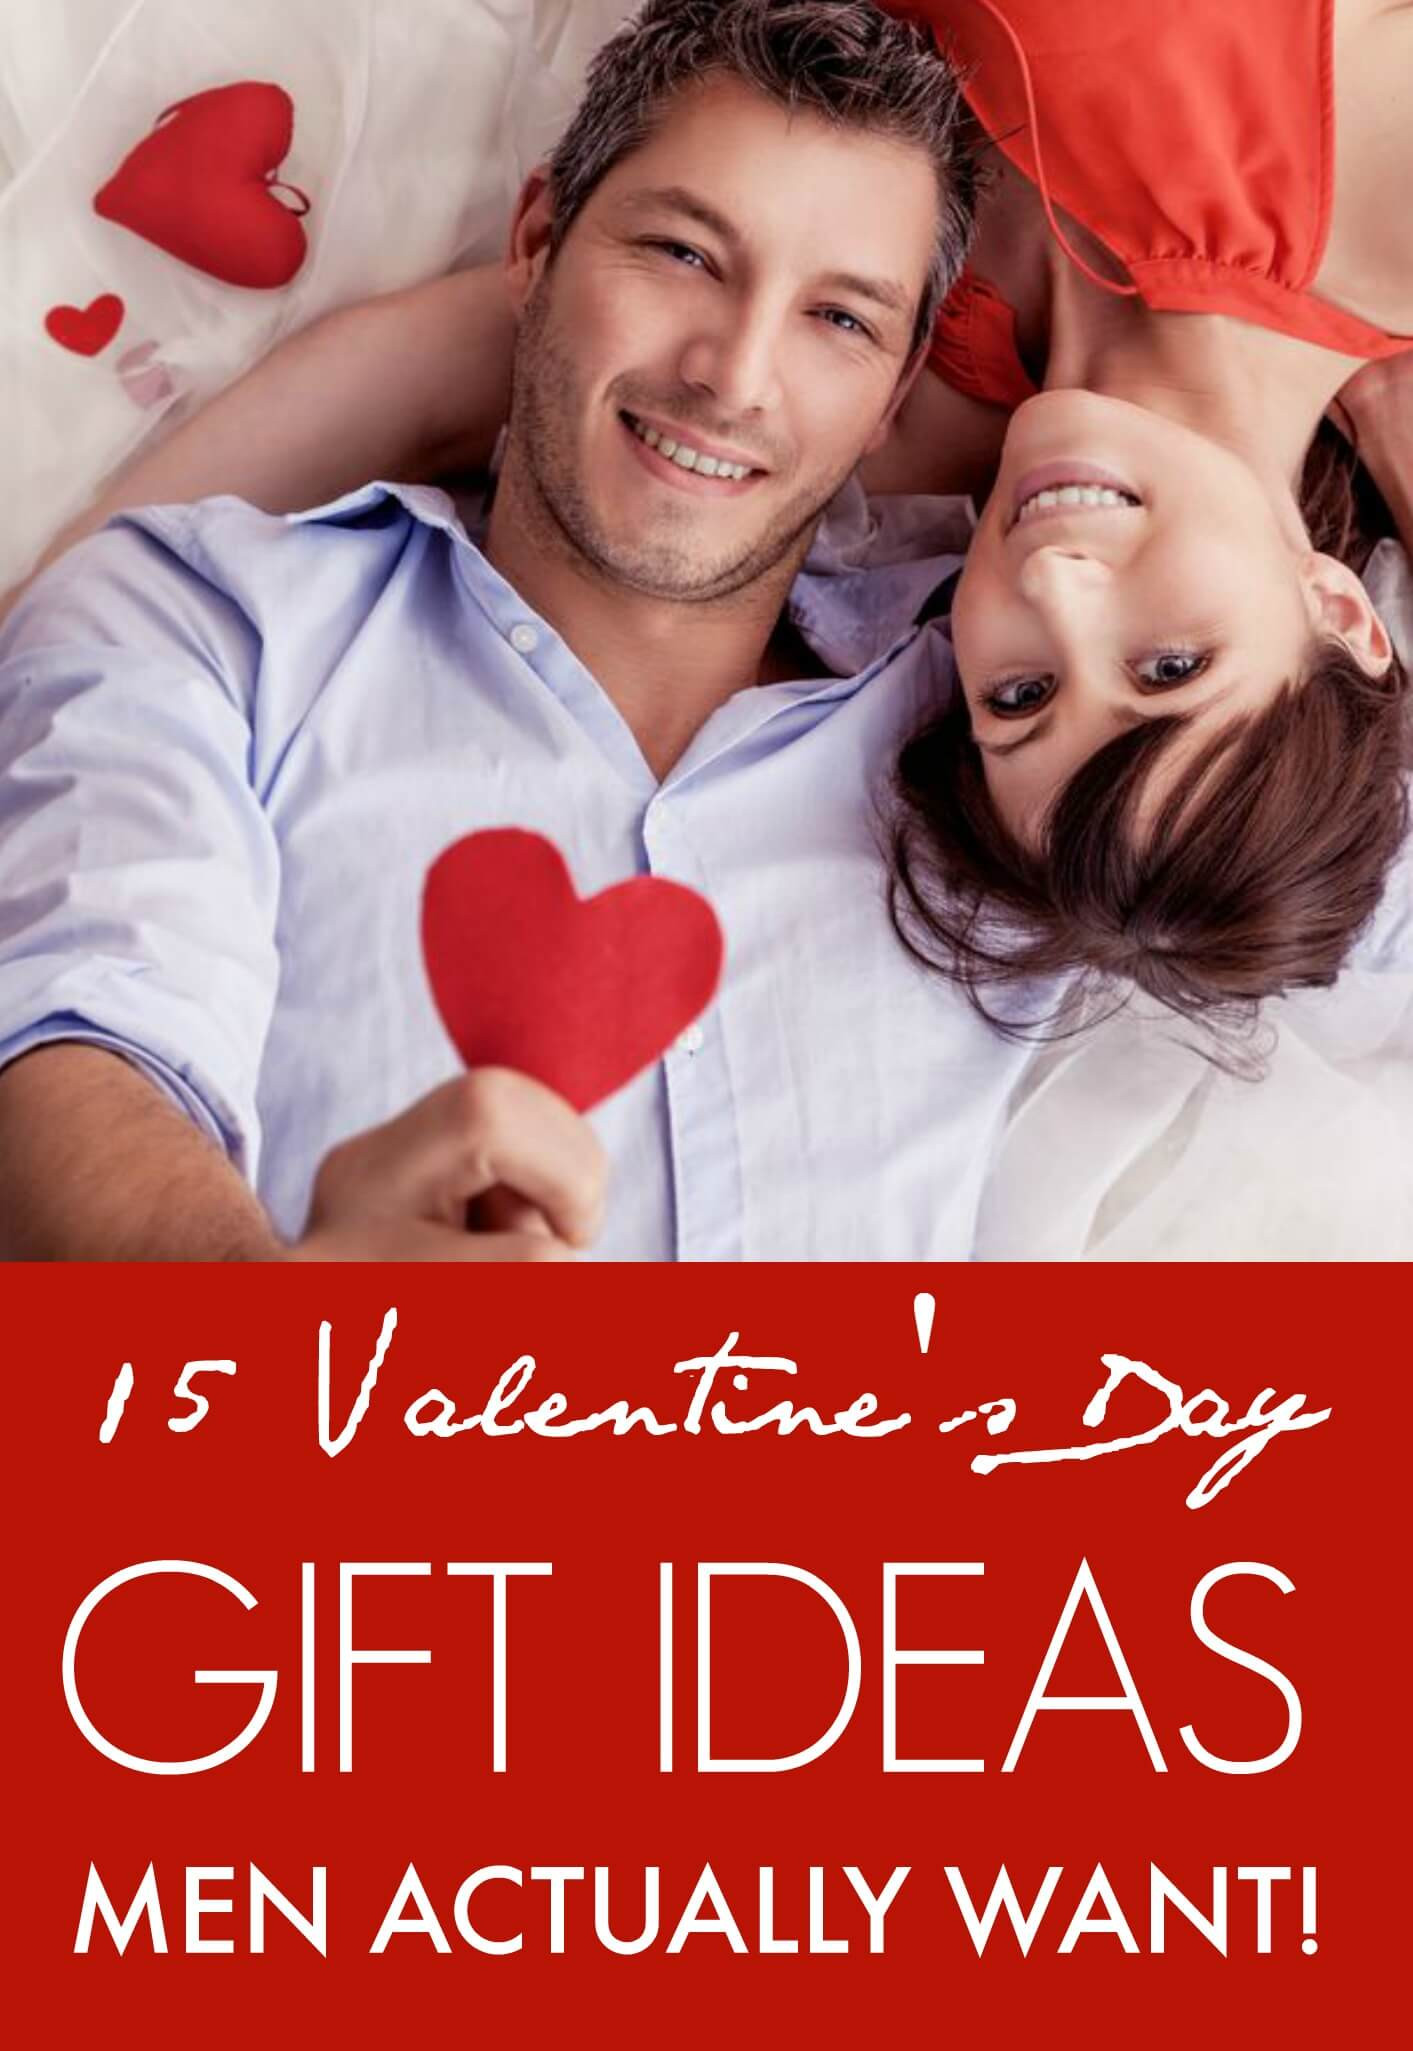 Gifts For Men On Valentines Day
 15 Valentine’s Day Gift ideas Men Actually Want